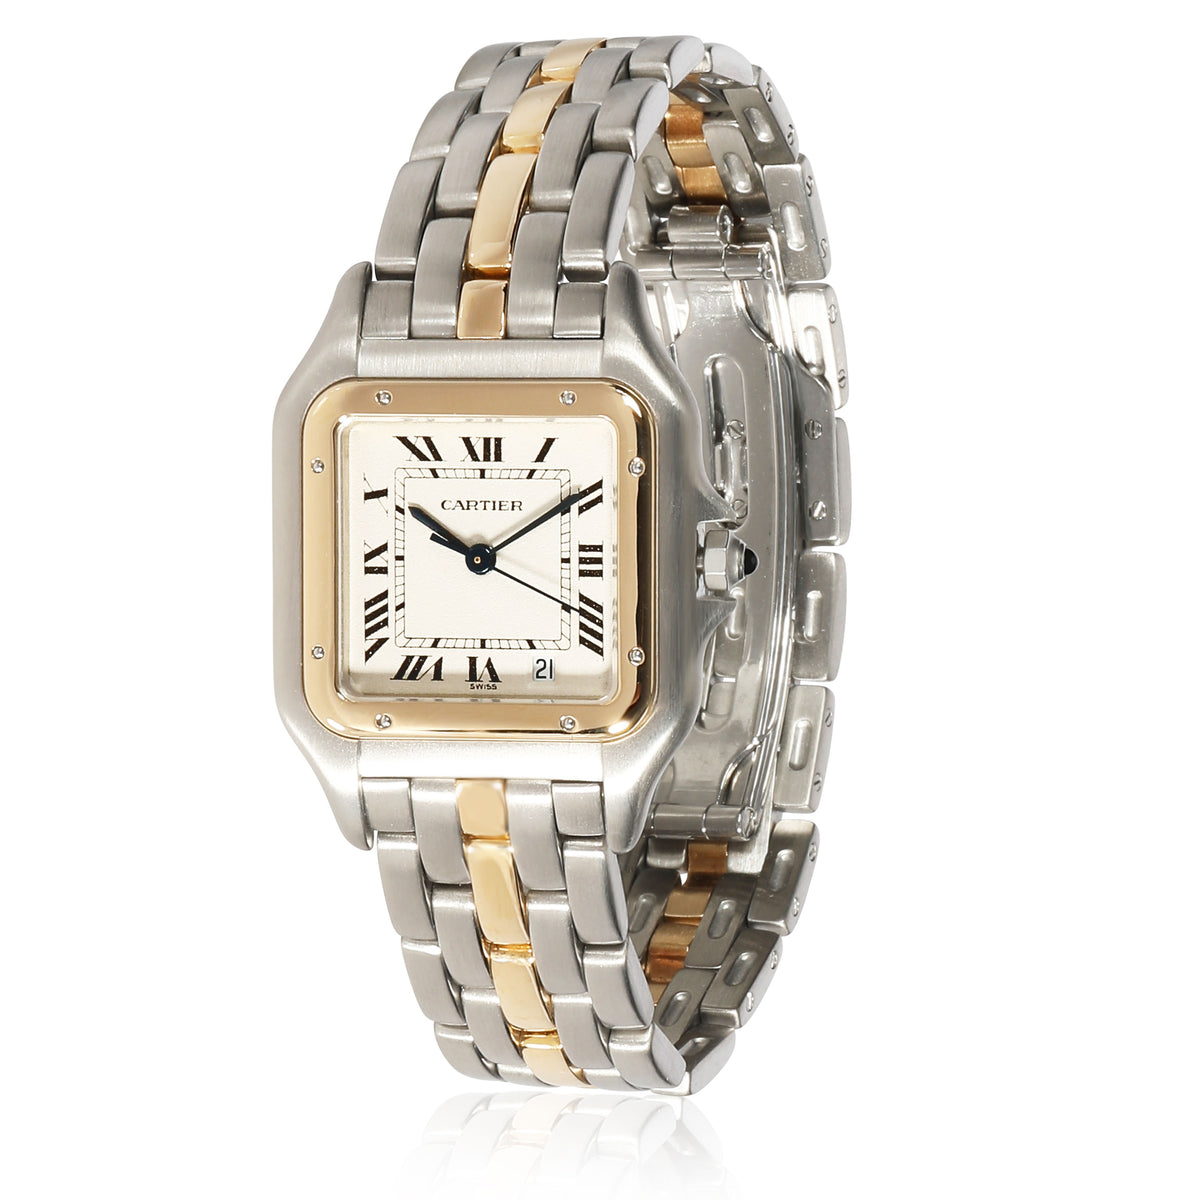 Cartier Panther 83083241 Women's Watch in 18kt Stainless Steel/Yellow Gold